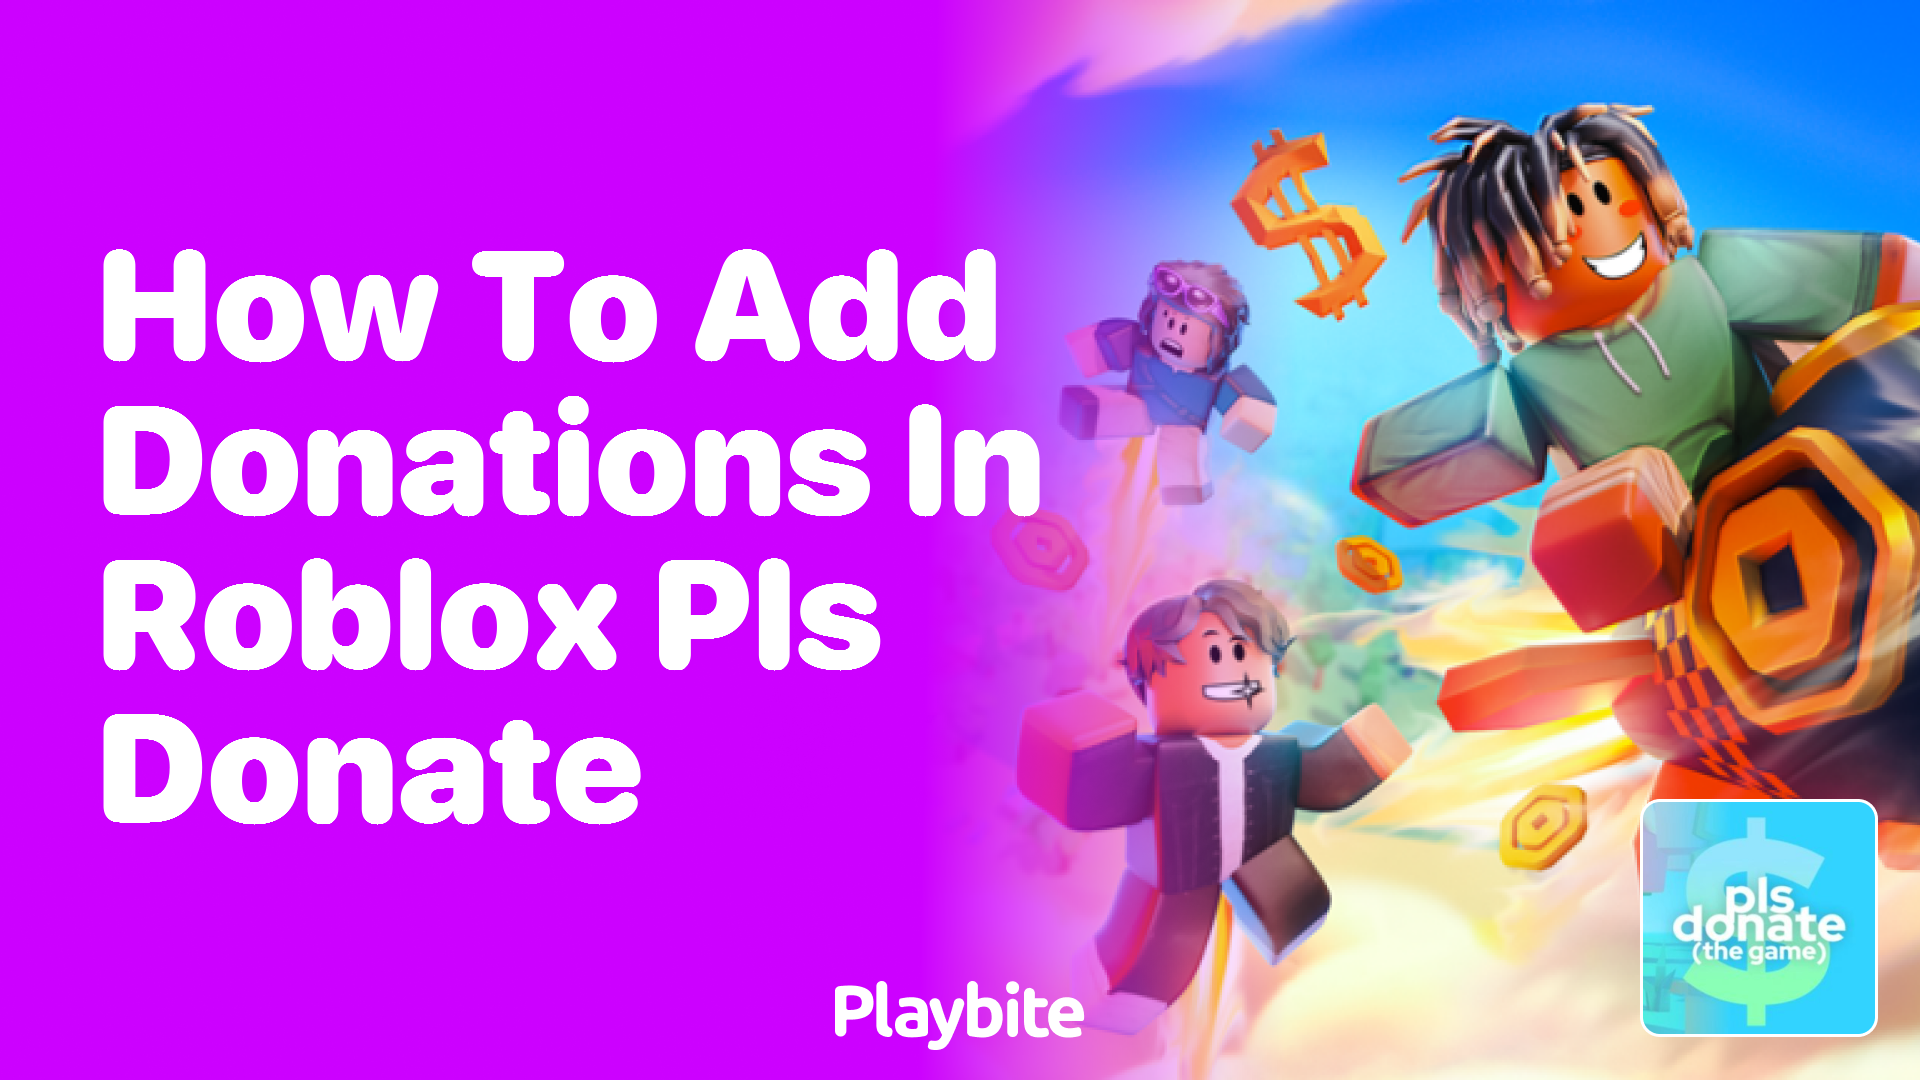 How to Add Donations in PLS DONATE on Roblox